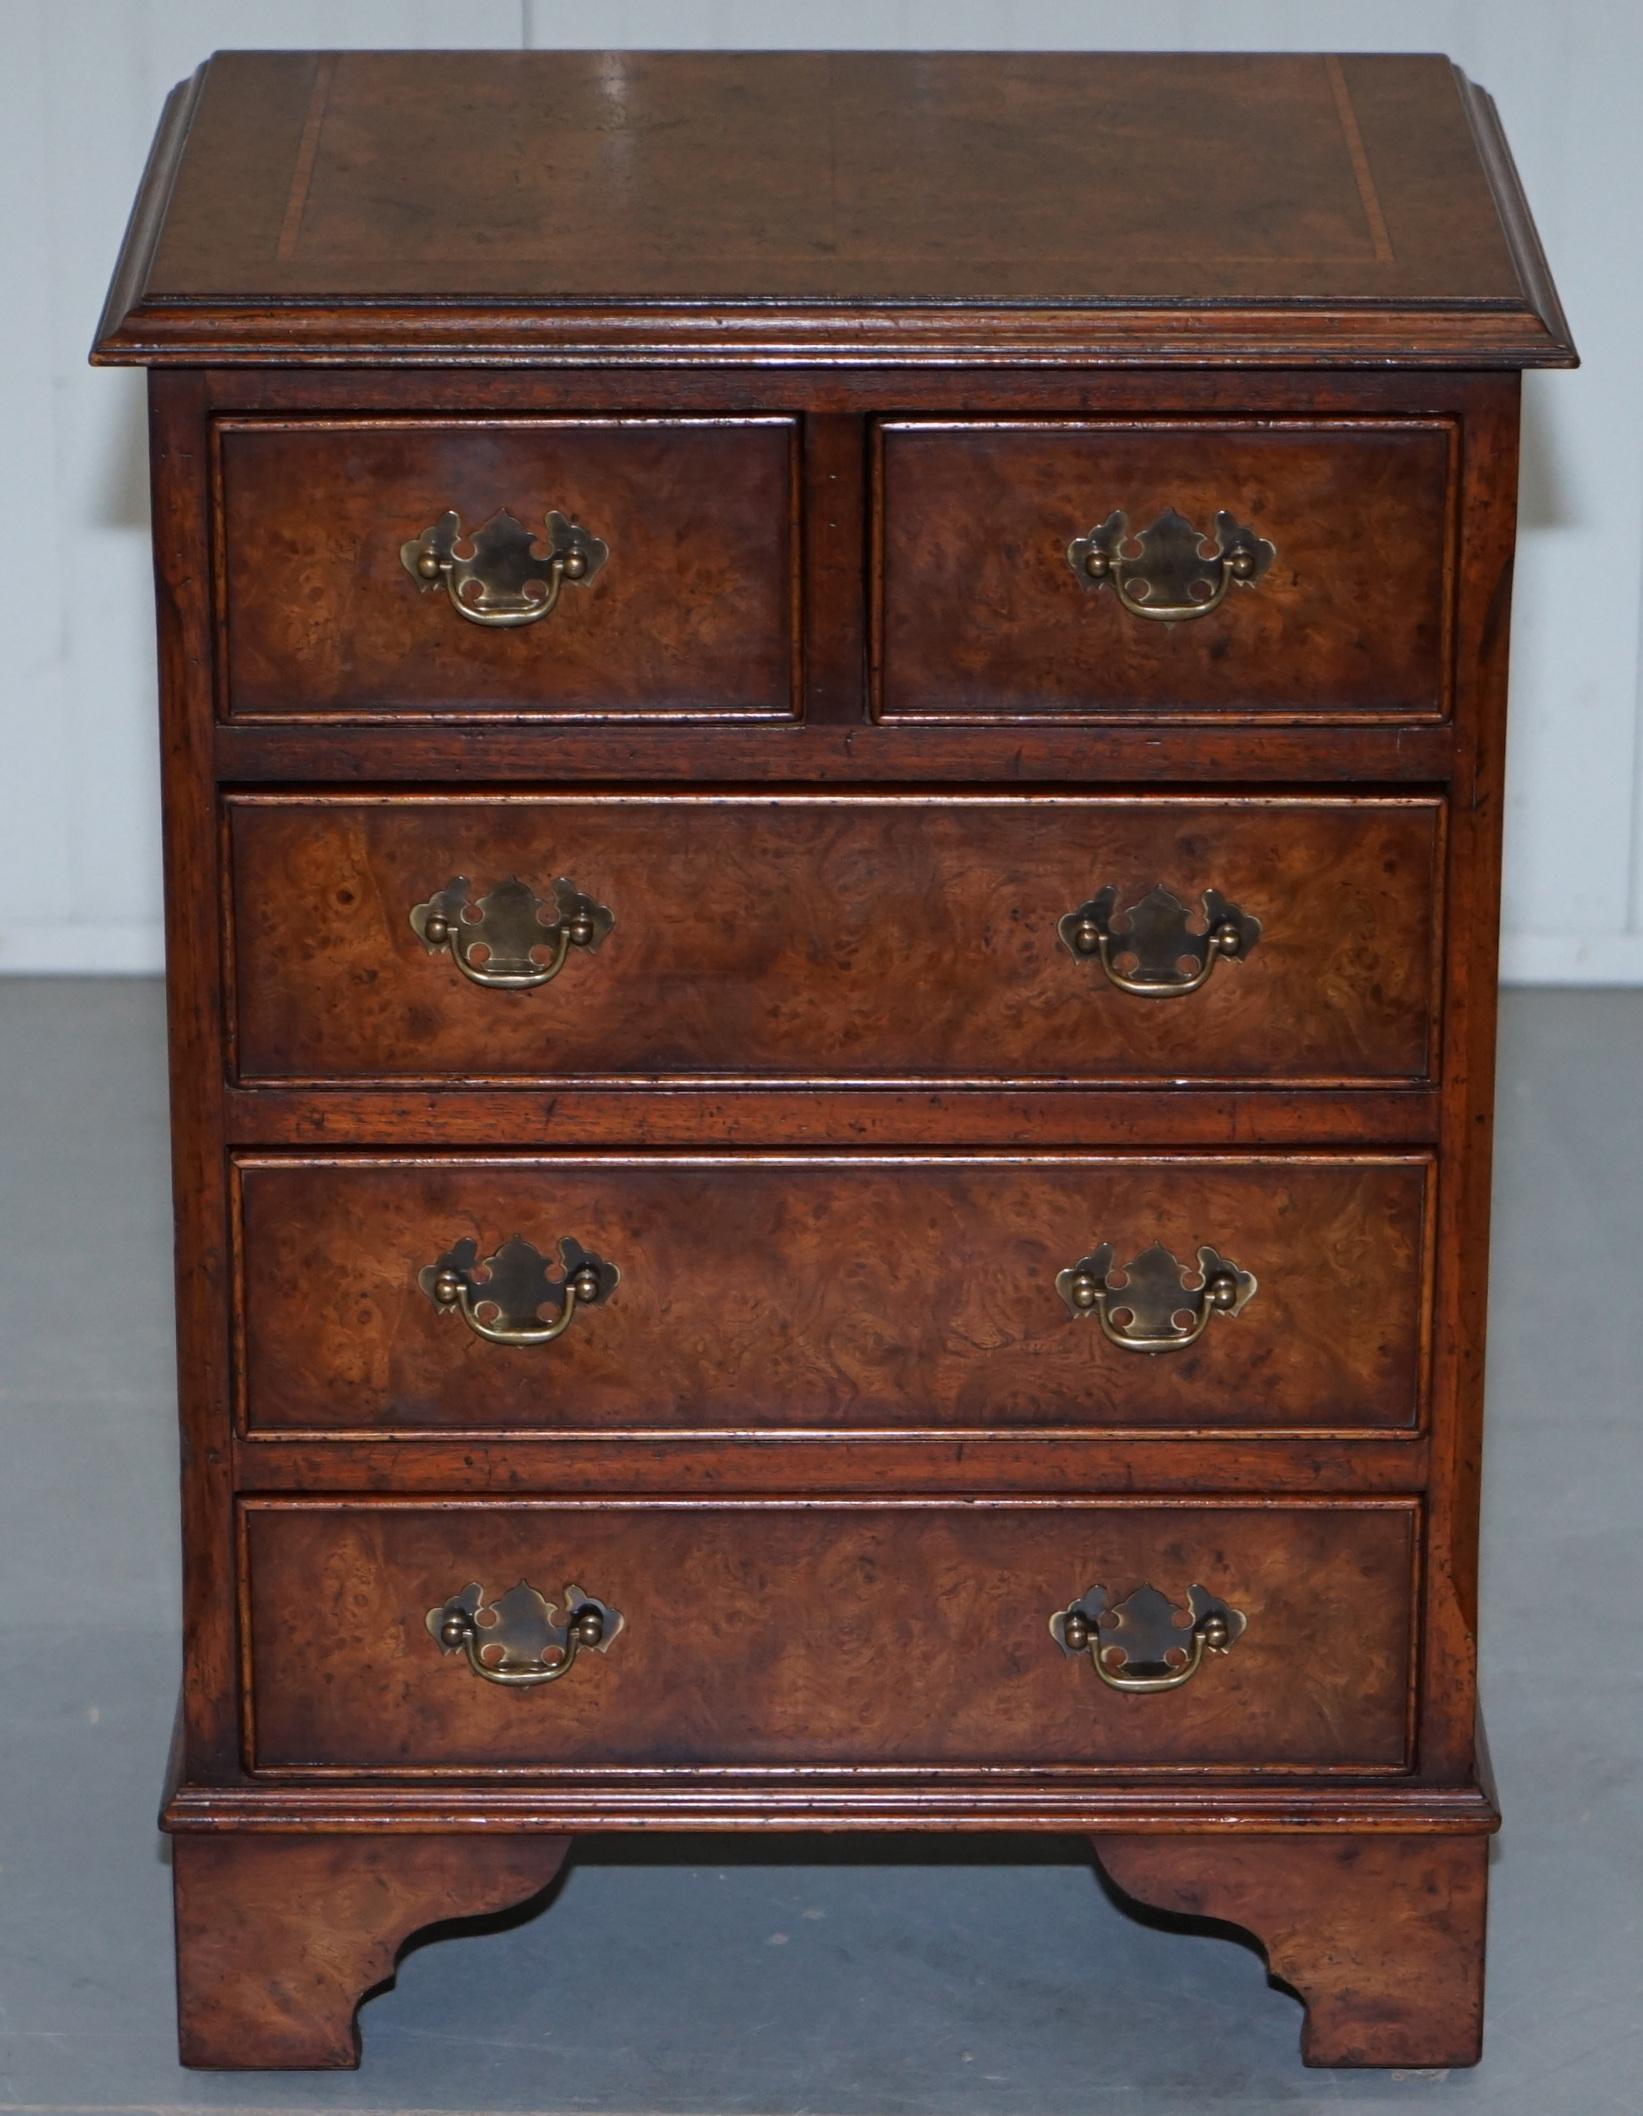 We are delighted to offer for auction this very nice vintage Burr Elm small chest of drawers made in the Georgian style

There are around 50-100 high definition super-sized pictures at the bottom of this page

A good looking and well made piece,